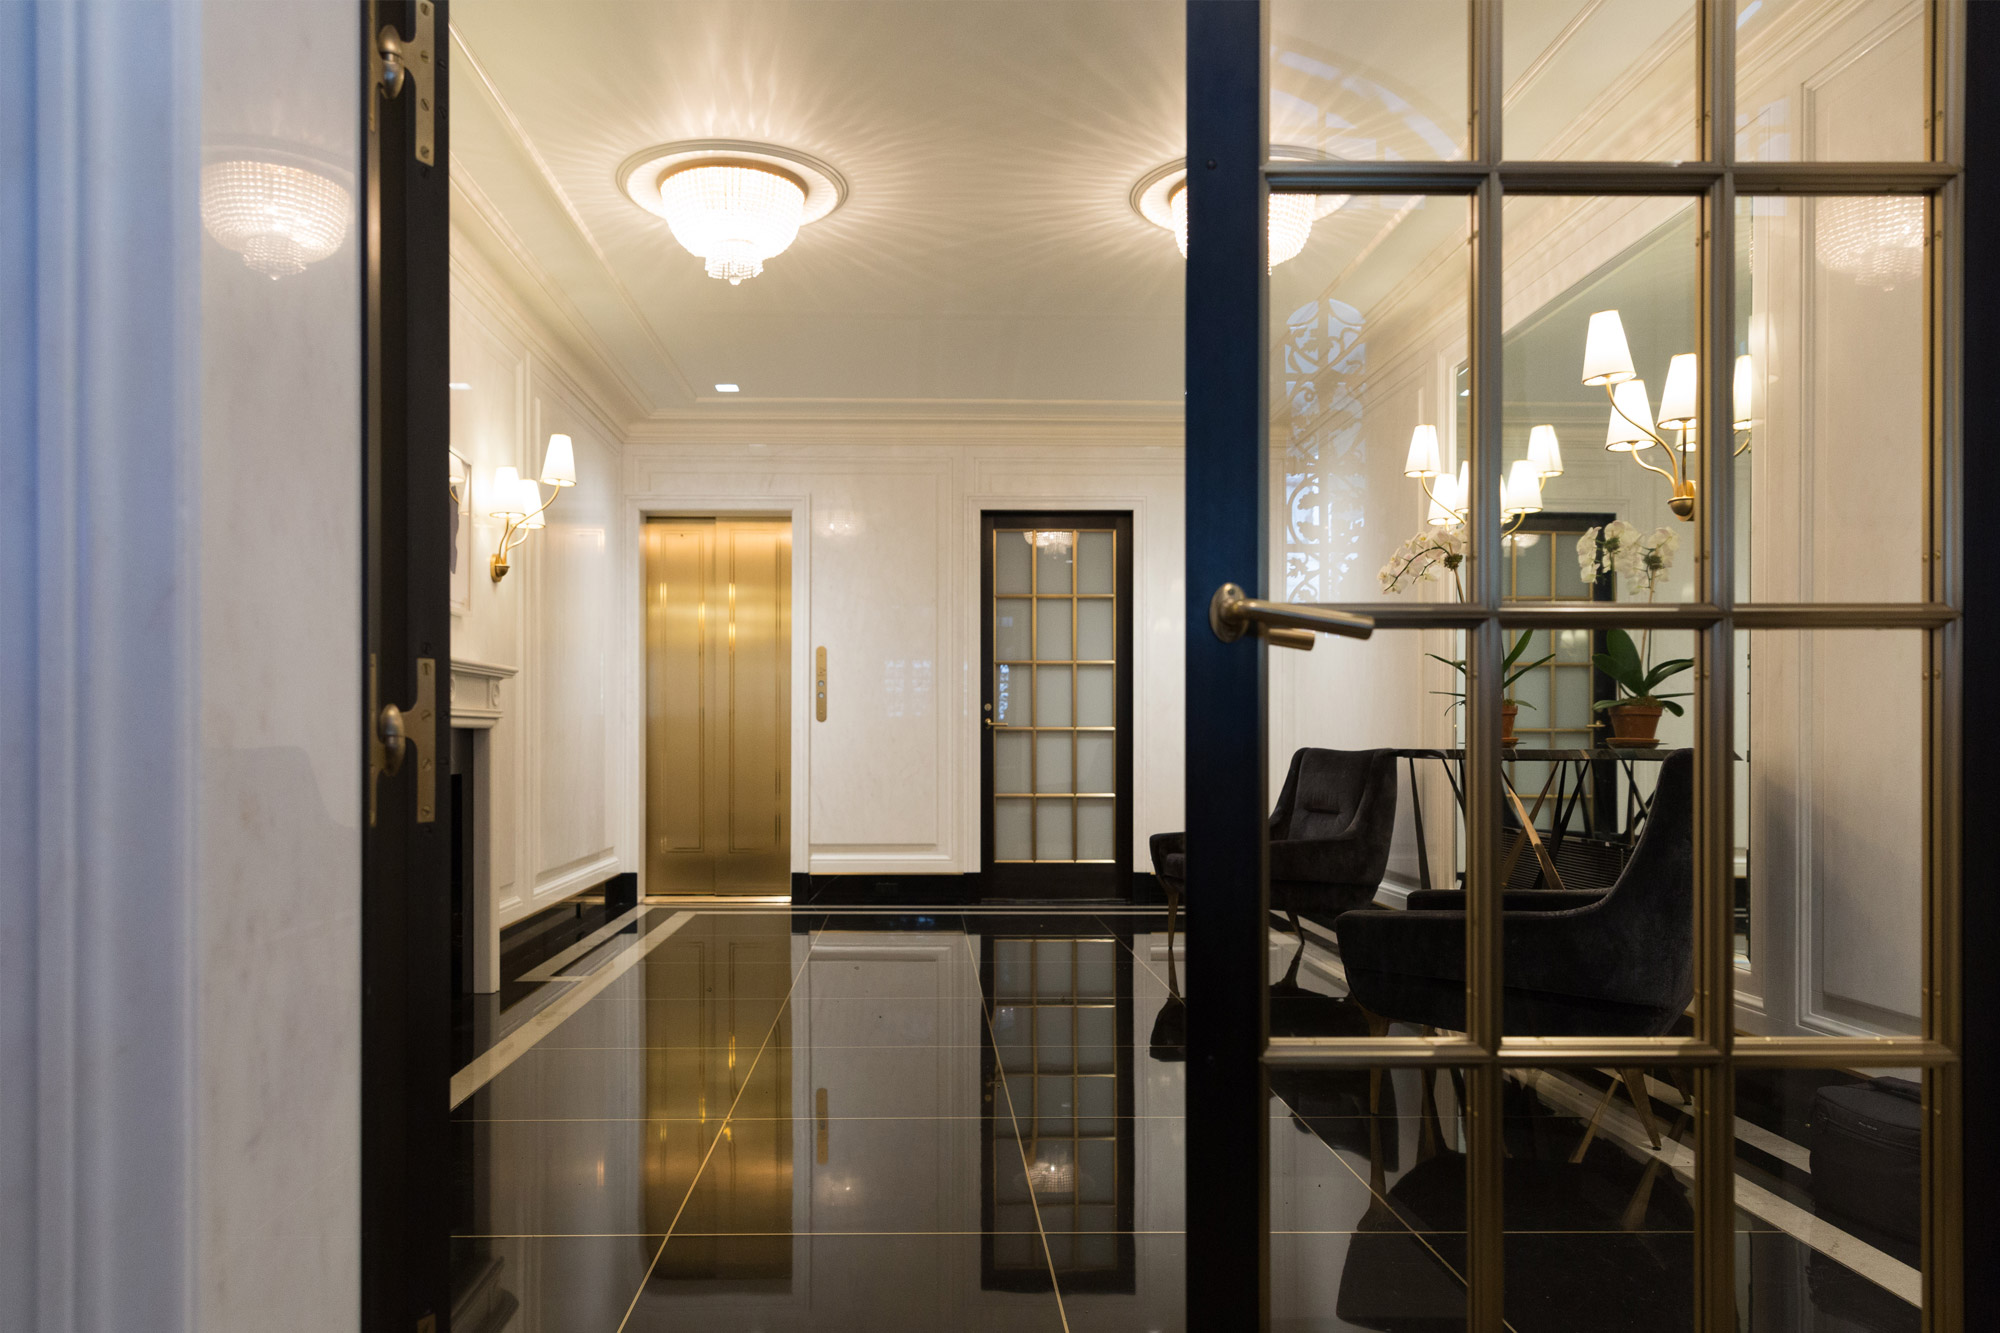 Lobby Renovation in an UES Pre-War Apartment Building - Post Renovation North